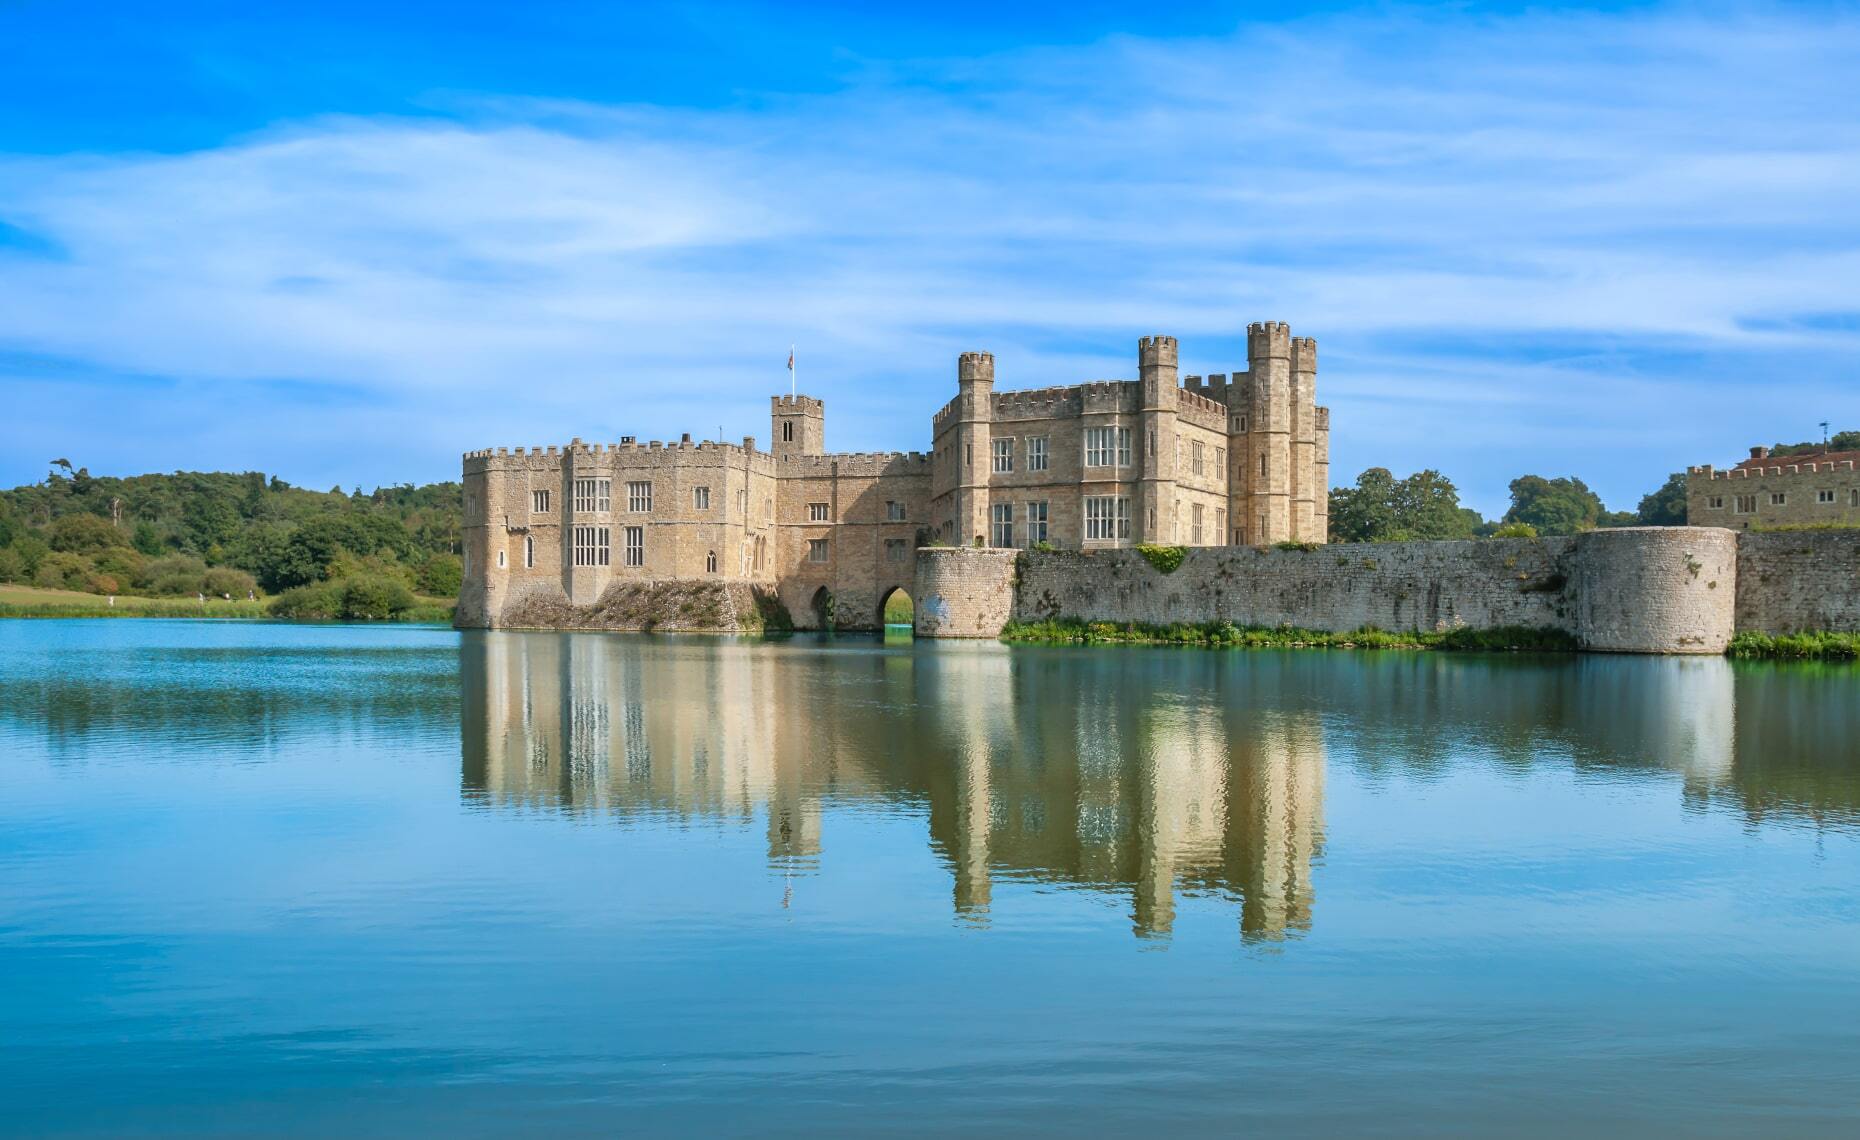 <p>Considered one of the most beautiful castles in England, <a href="https://www.visitbritainshop.com/ca/en/leeds-castle" class="atom_link atom_valid" rel="noreferrer noopener">Leeds Castle</a> started out as a fortress during the Norman Conquest before being turned into a royal residence. Its history is also marked by the passage of several influential women, including the queens Eleanor of Castile and Catherine of Aragon, as well as Lady Olive Baillie, an Anglo-American heiress who revitalized the residence in the 1930s.</p>